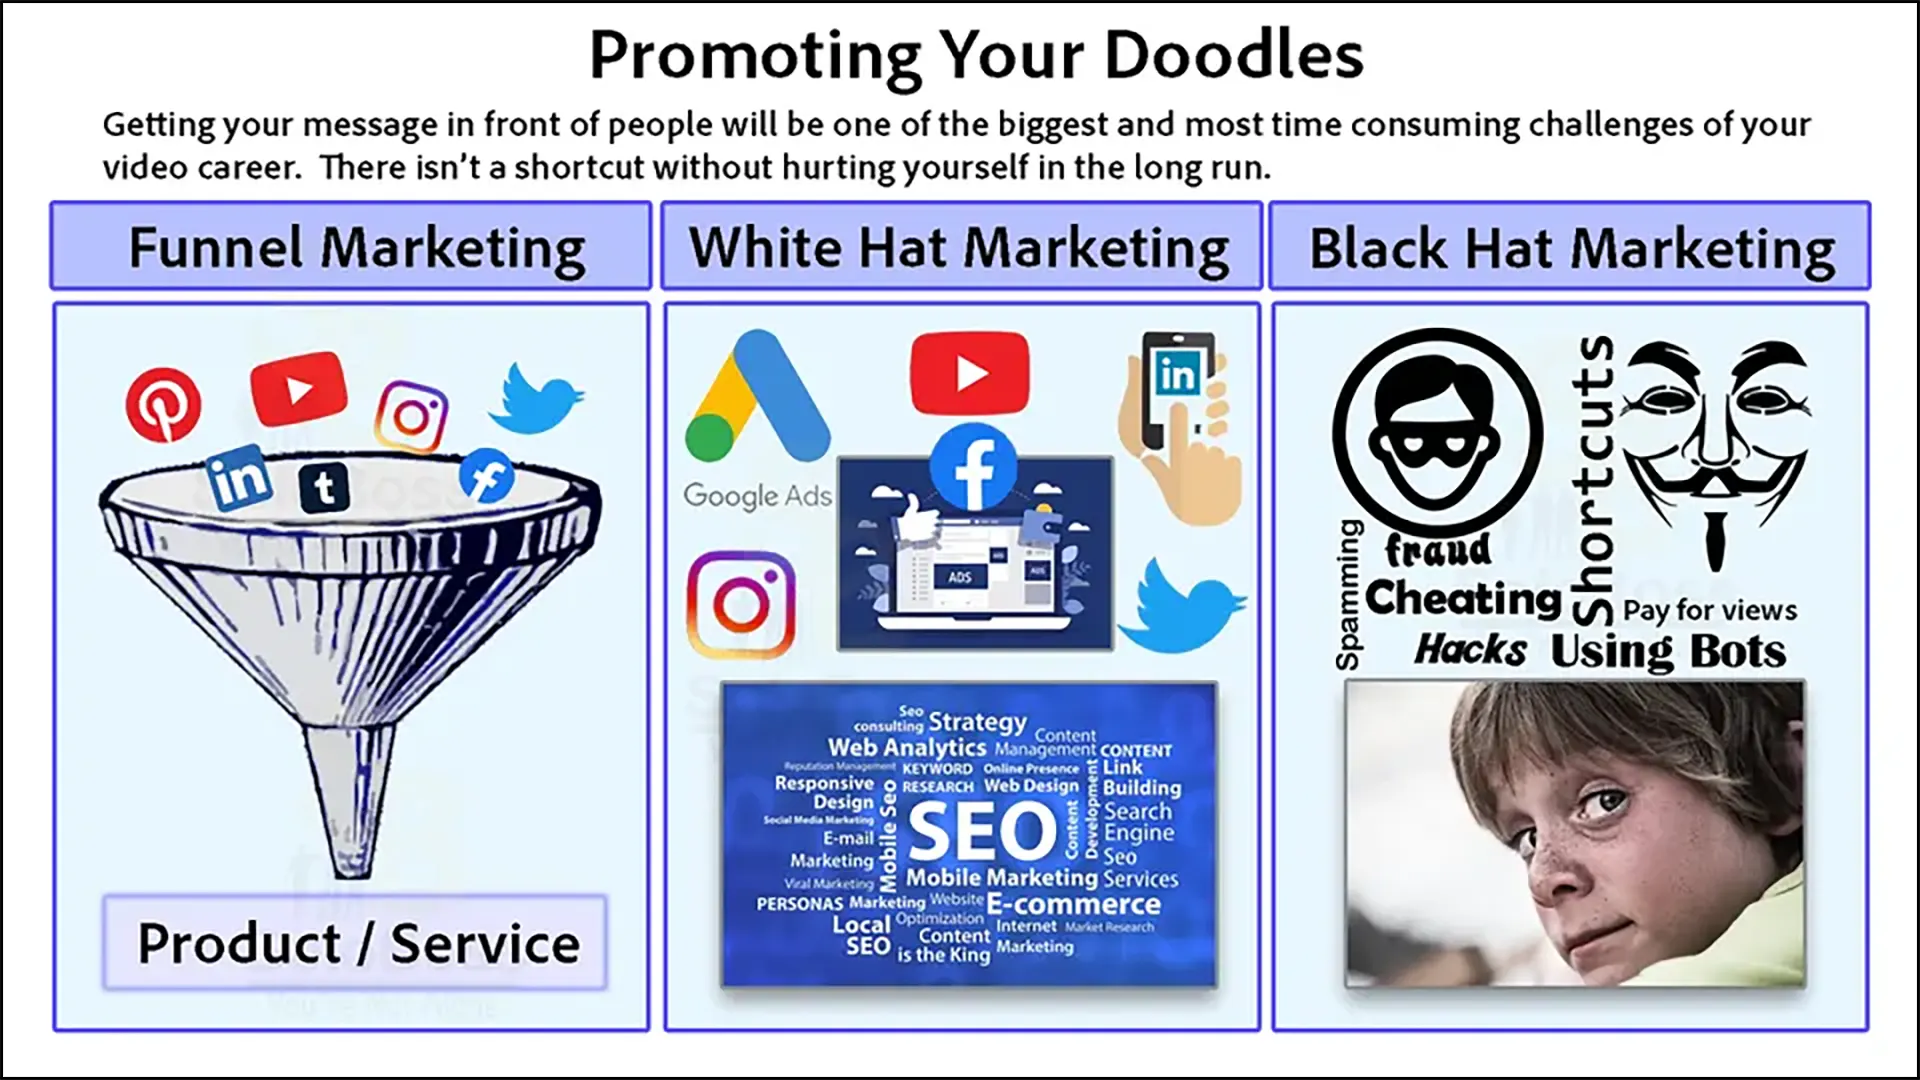 Displaying various promotional methods including funnel marketing, white hat marketing and black hat marketing.